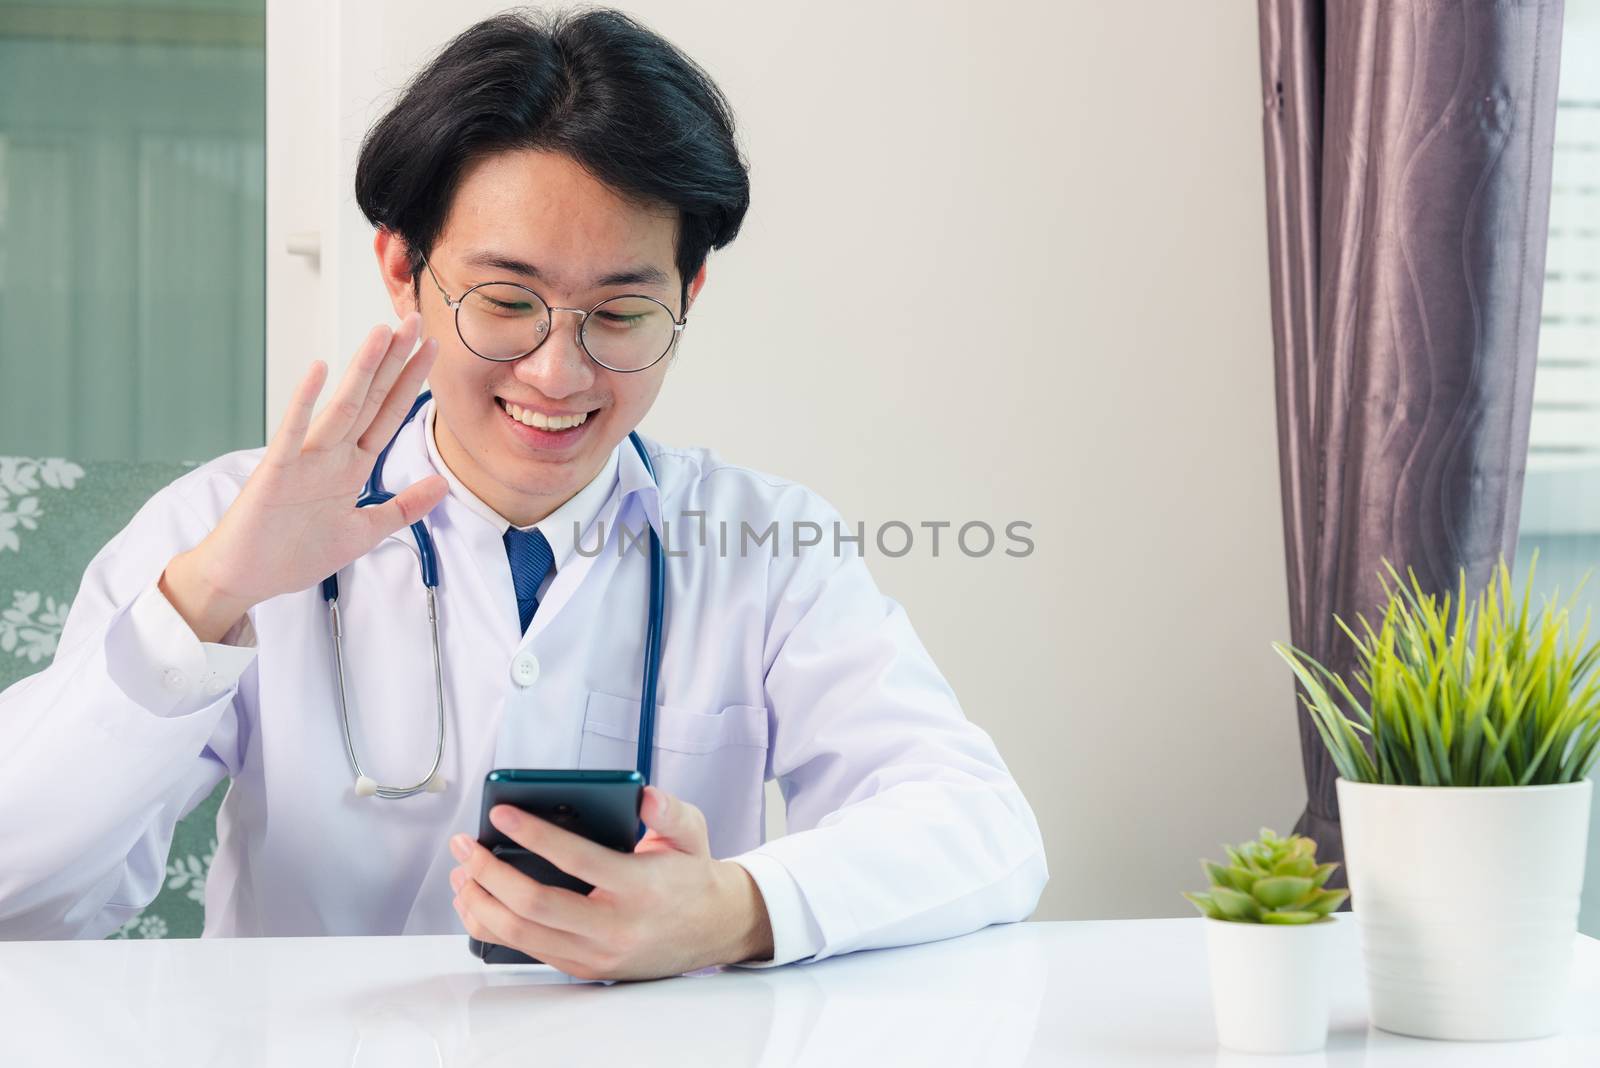 Asian doctor young handsome man smiling video call raise hands to greet patients with digital smart mobile phone at hospital desk office, Technology healthcare medical concept